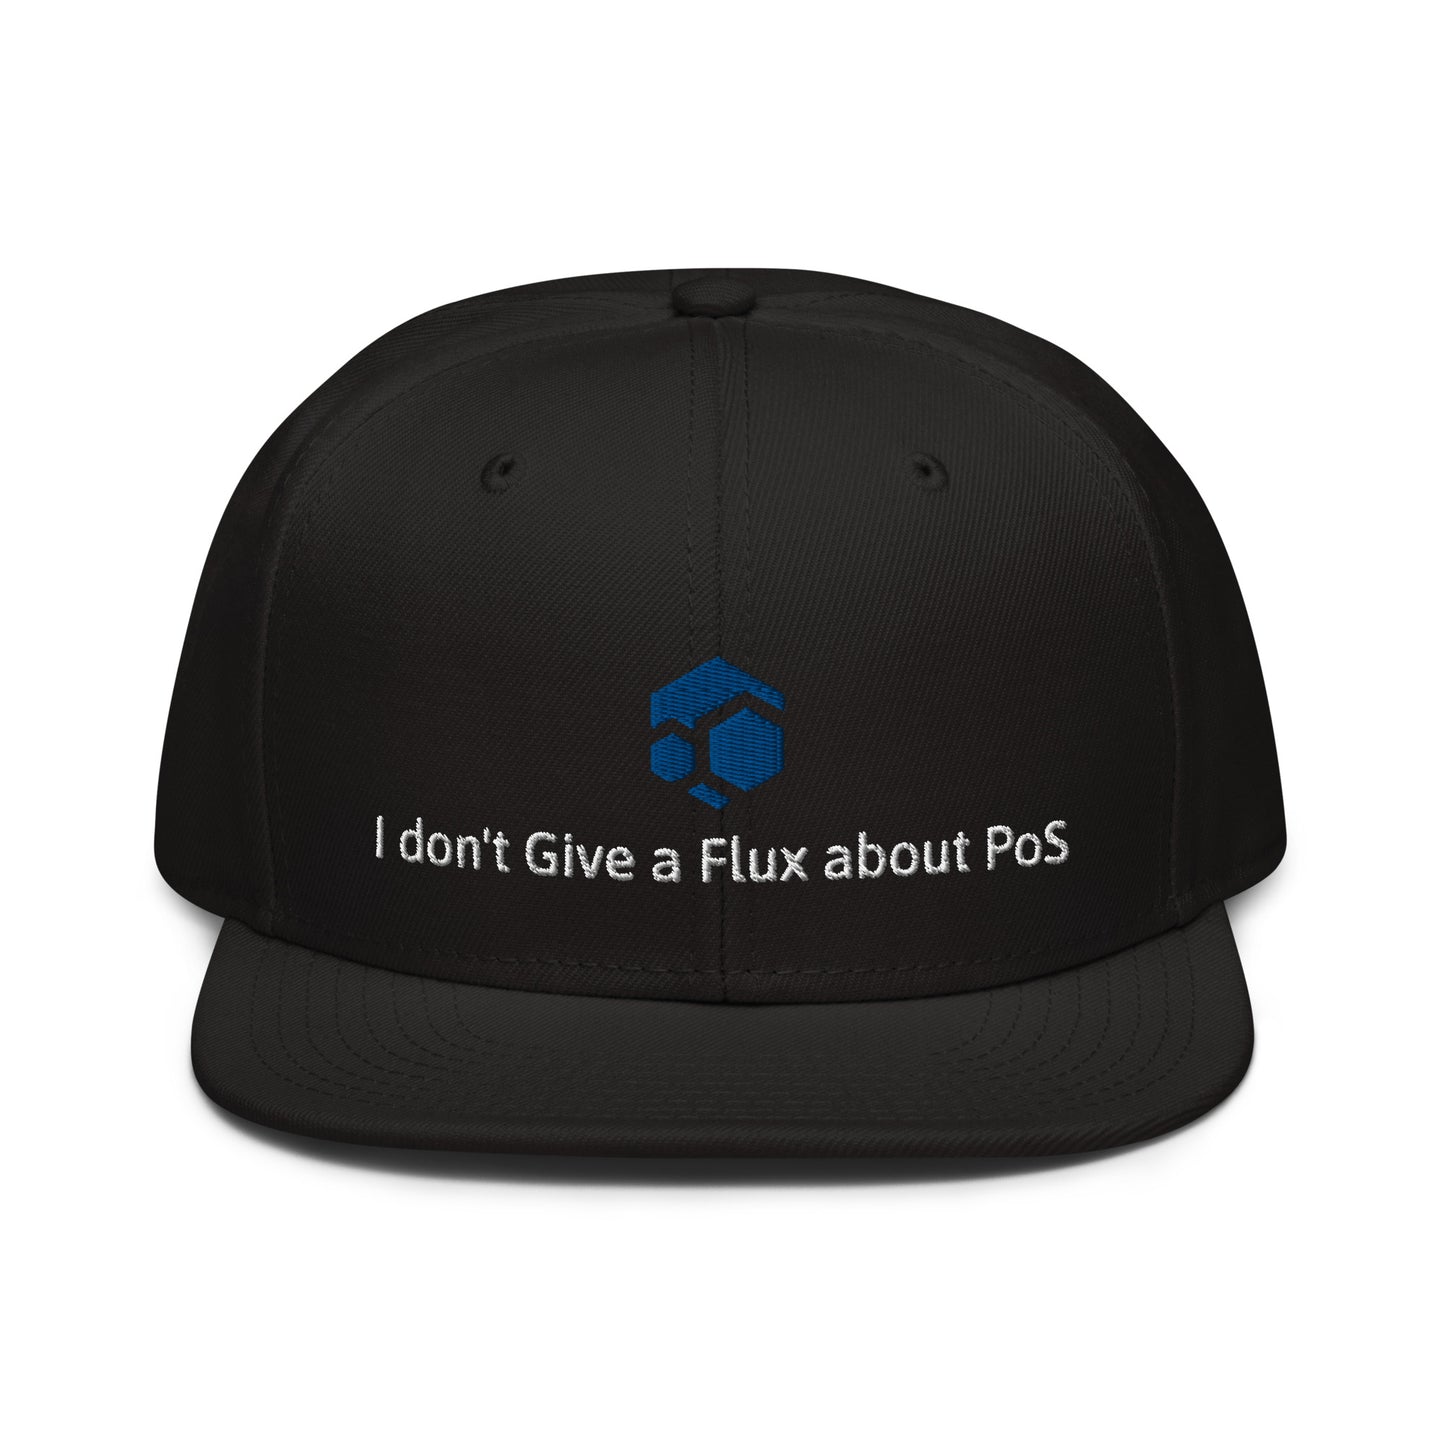 FLUX "I don't Give a Flux about PoS" Snapback Hat